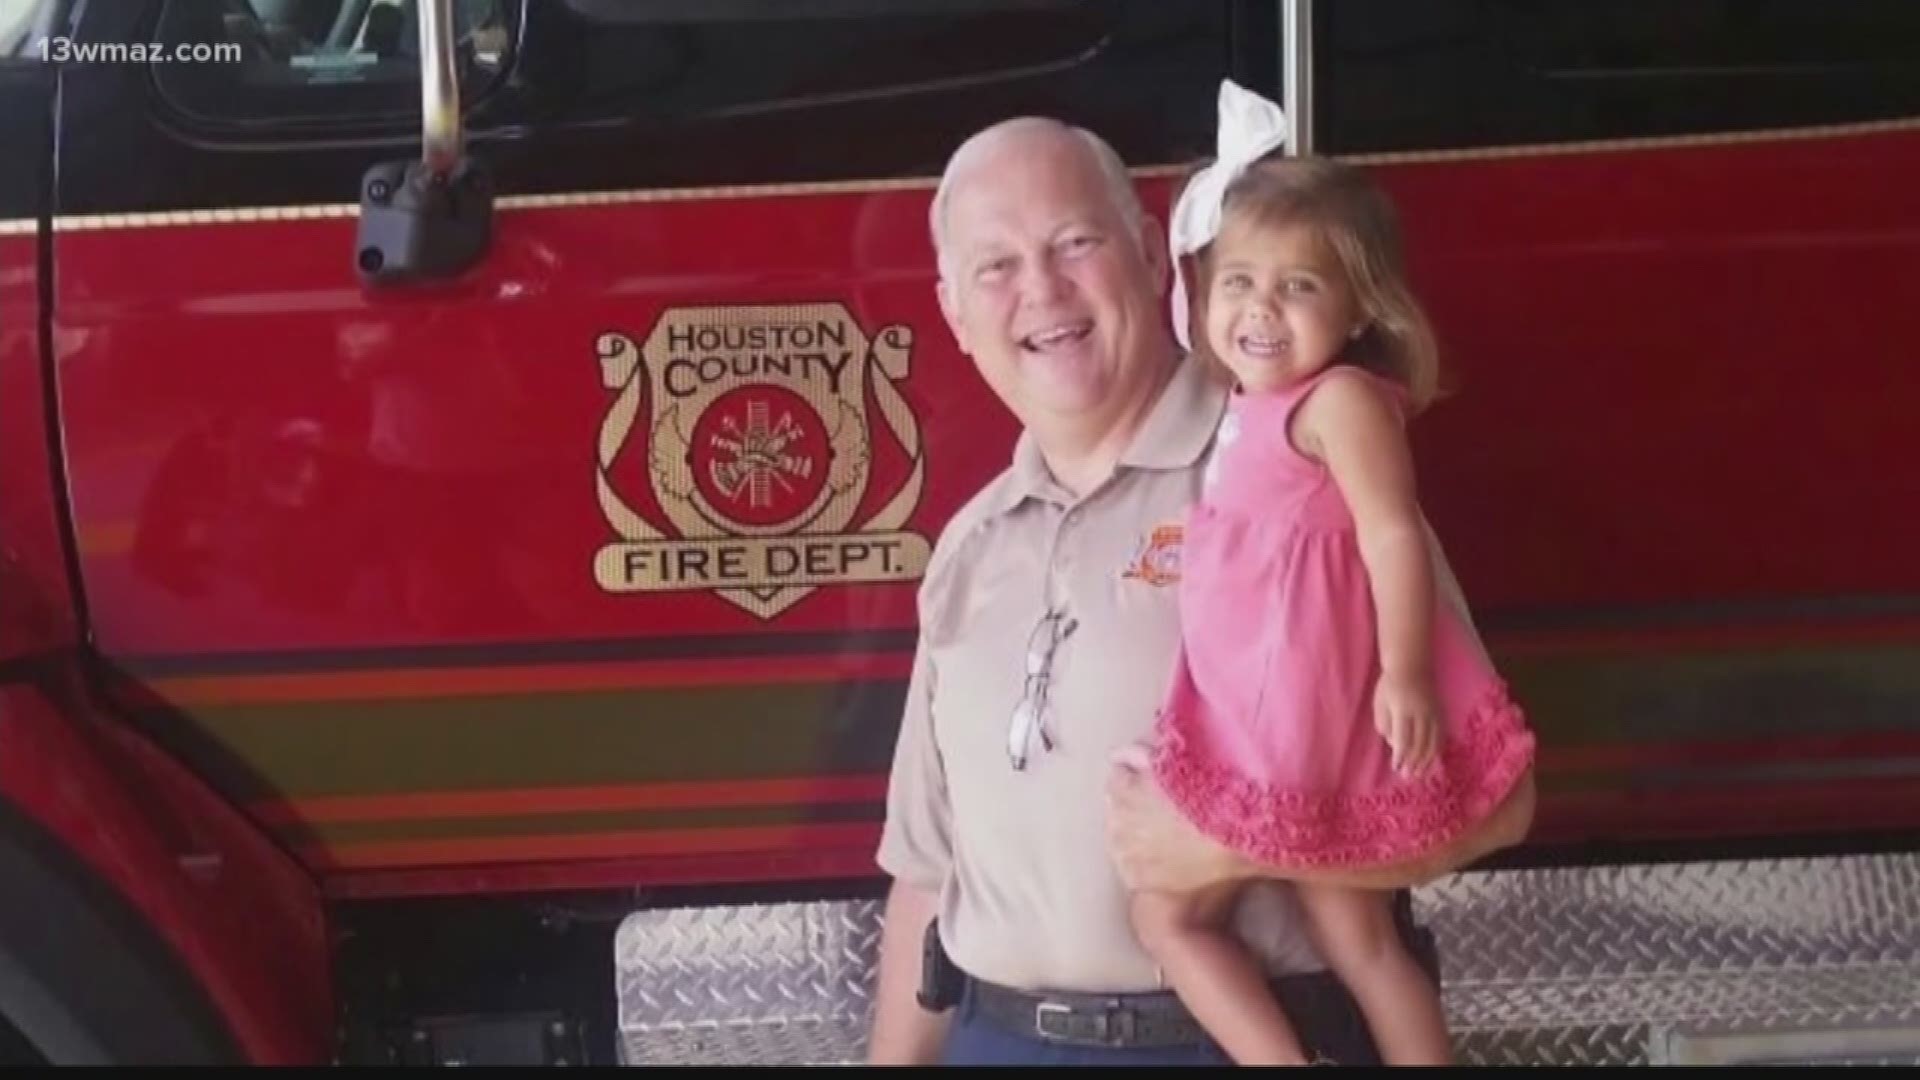 Chief Jimmy Williams served Houston County through 36 years of fires, storms, tragedies, and dangerous times. Now, the county says goodbye. Houston's fire chief died Tuesday morning after a battle with pancreatic cancer. People say they remember Williams as both a leader and a friend.